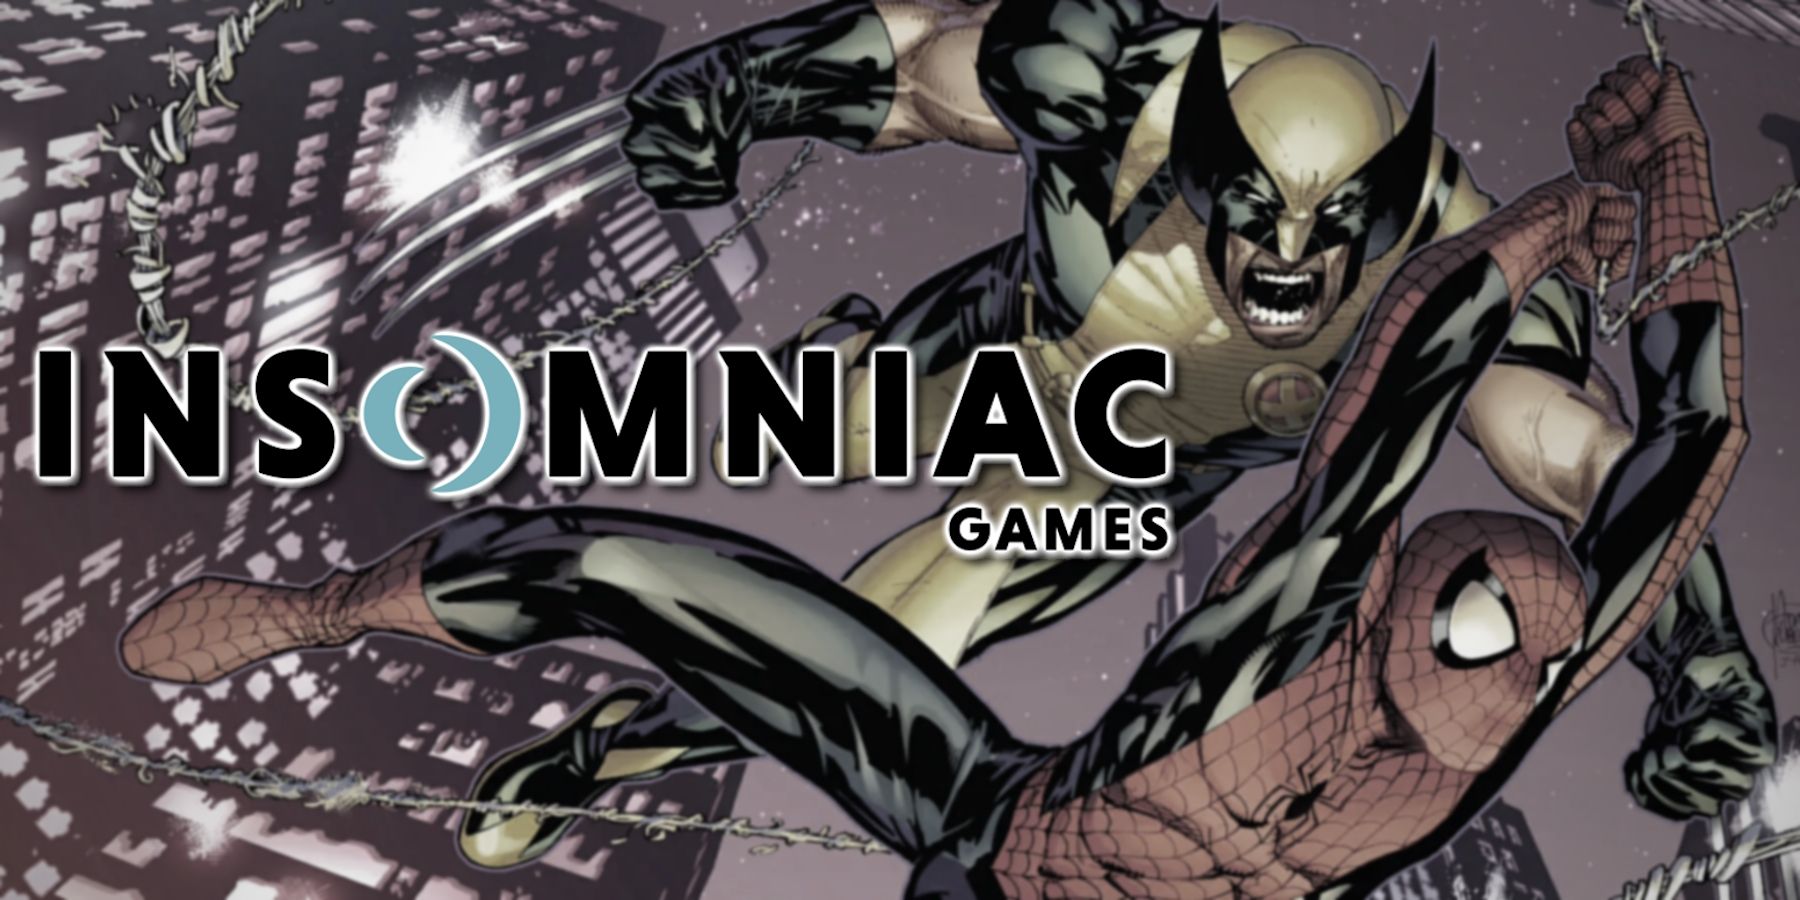 Astonishing Spider-Man & Wolverine cover with Insomniac Games logo